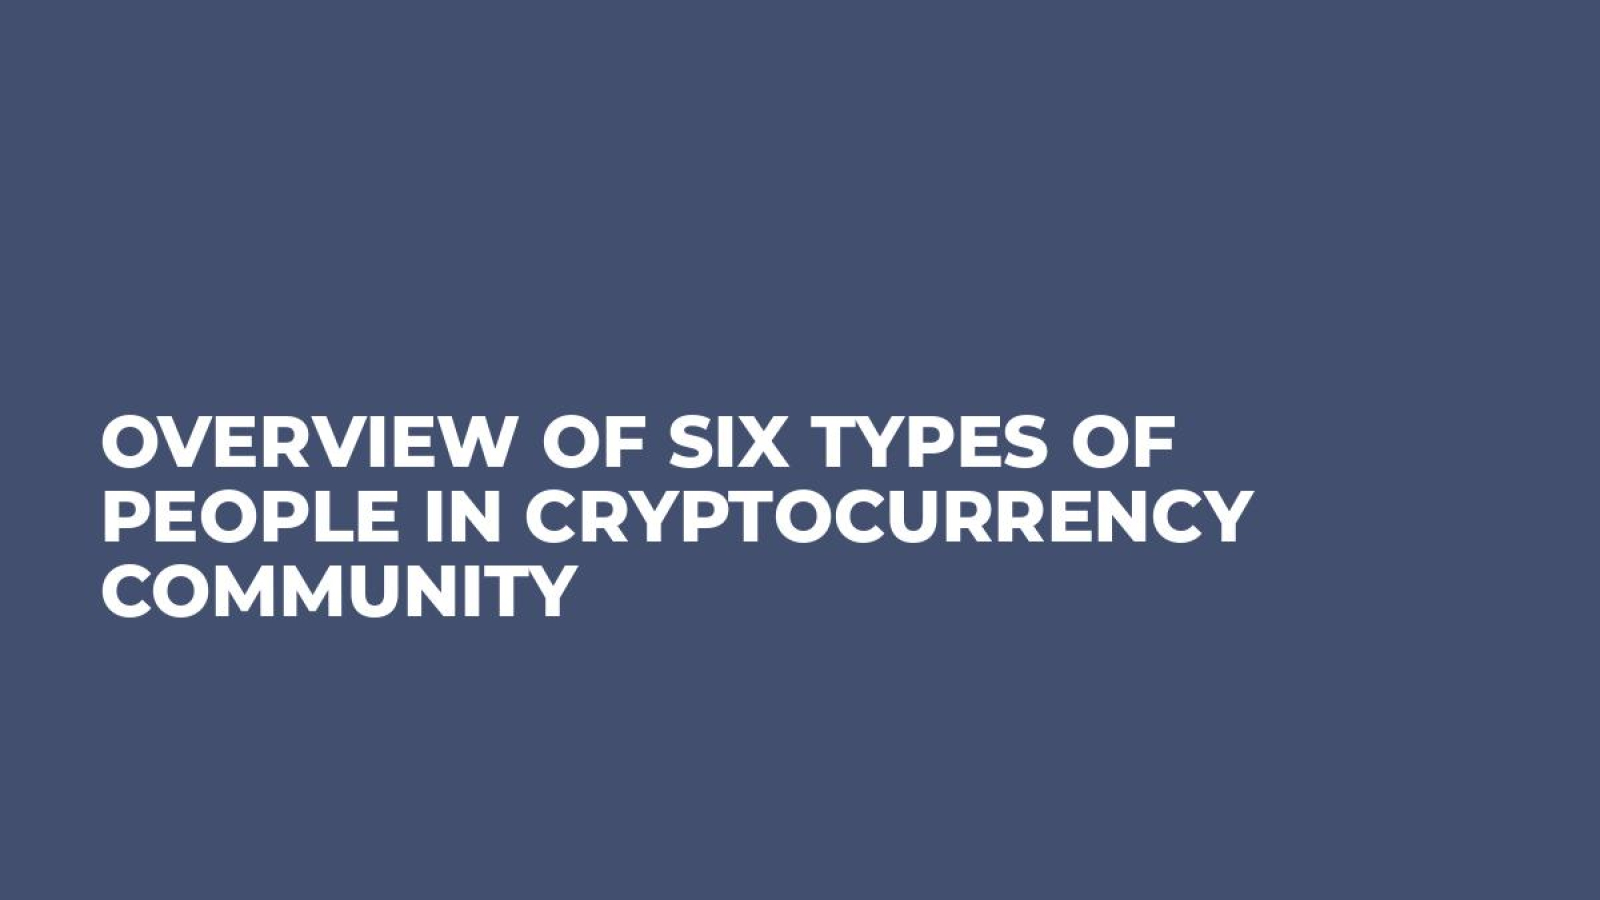 Overview of Six Types of People in Cryptocurrency Community